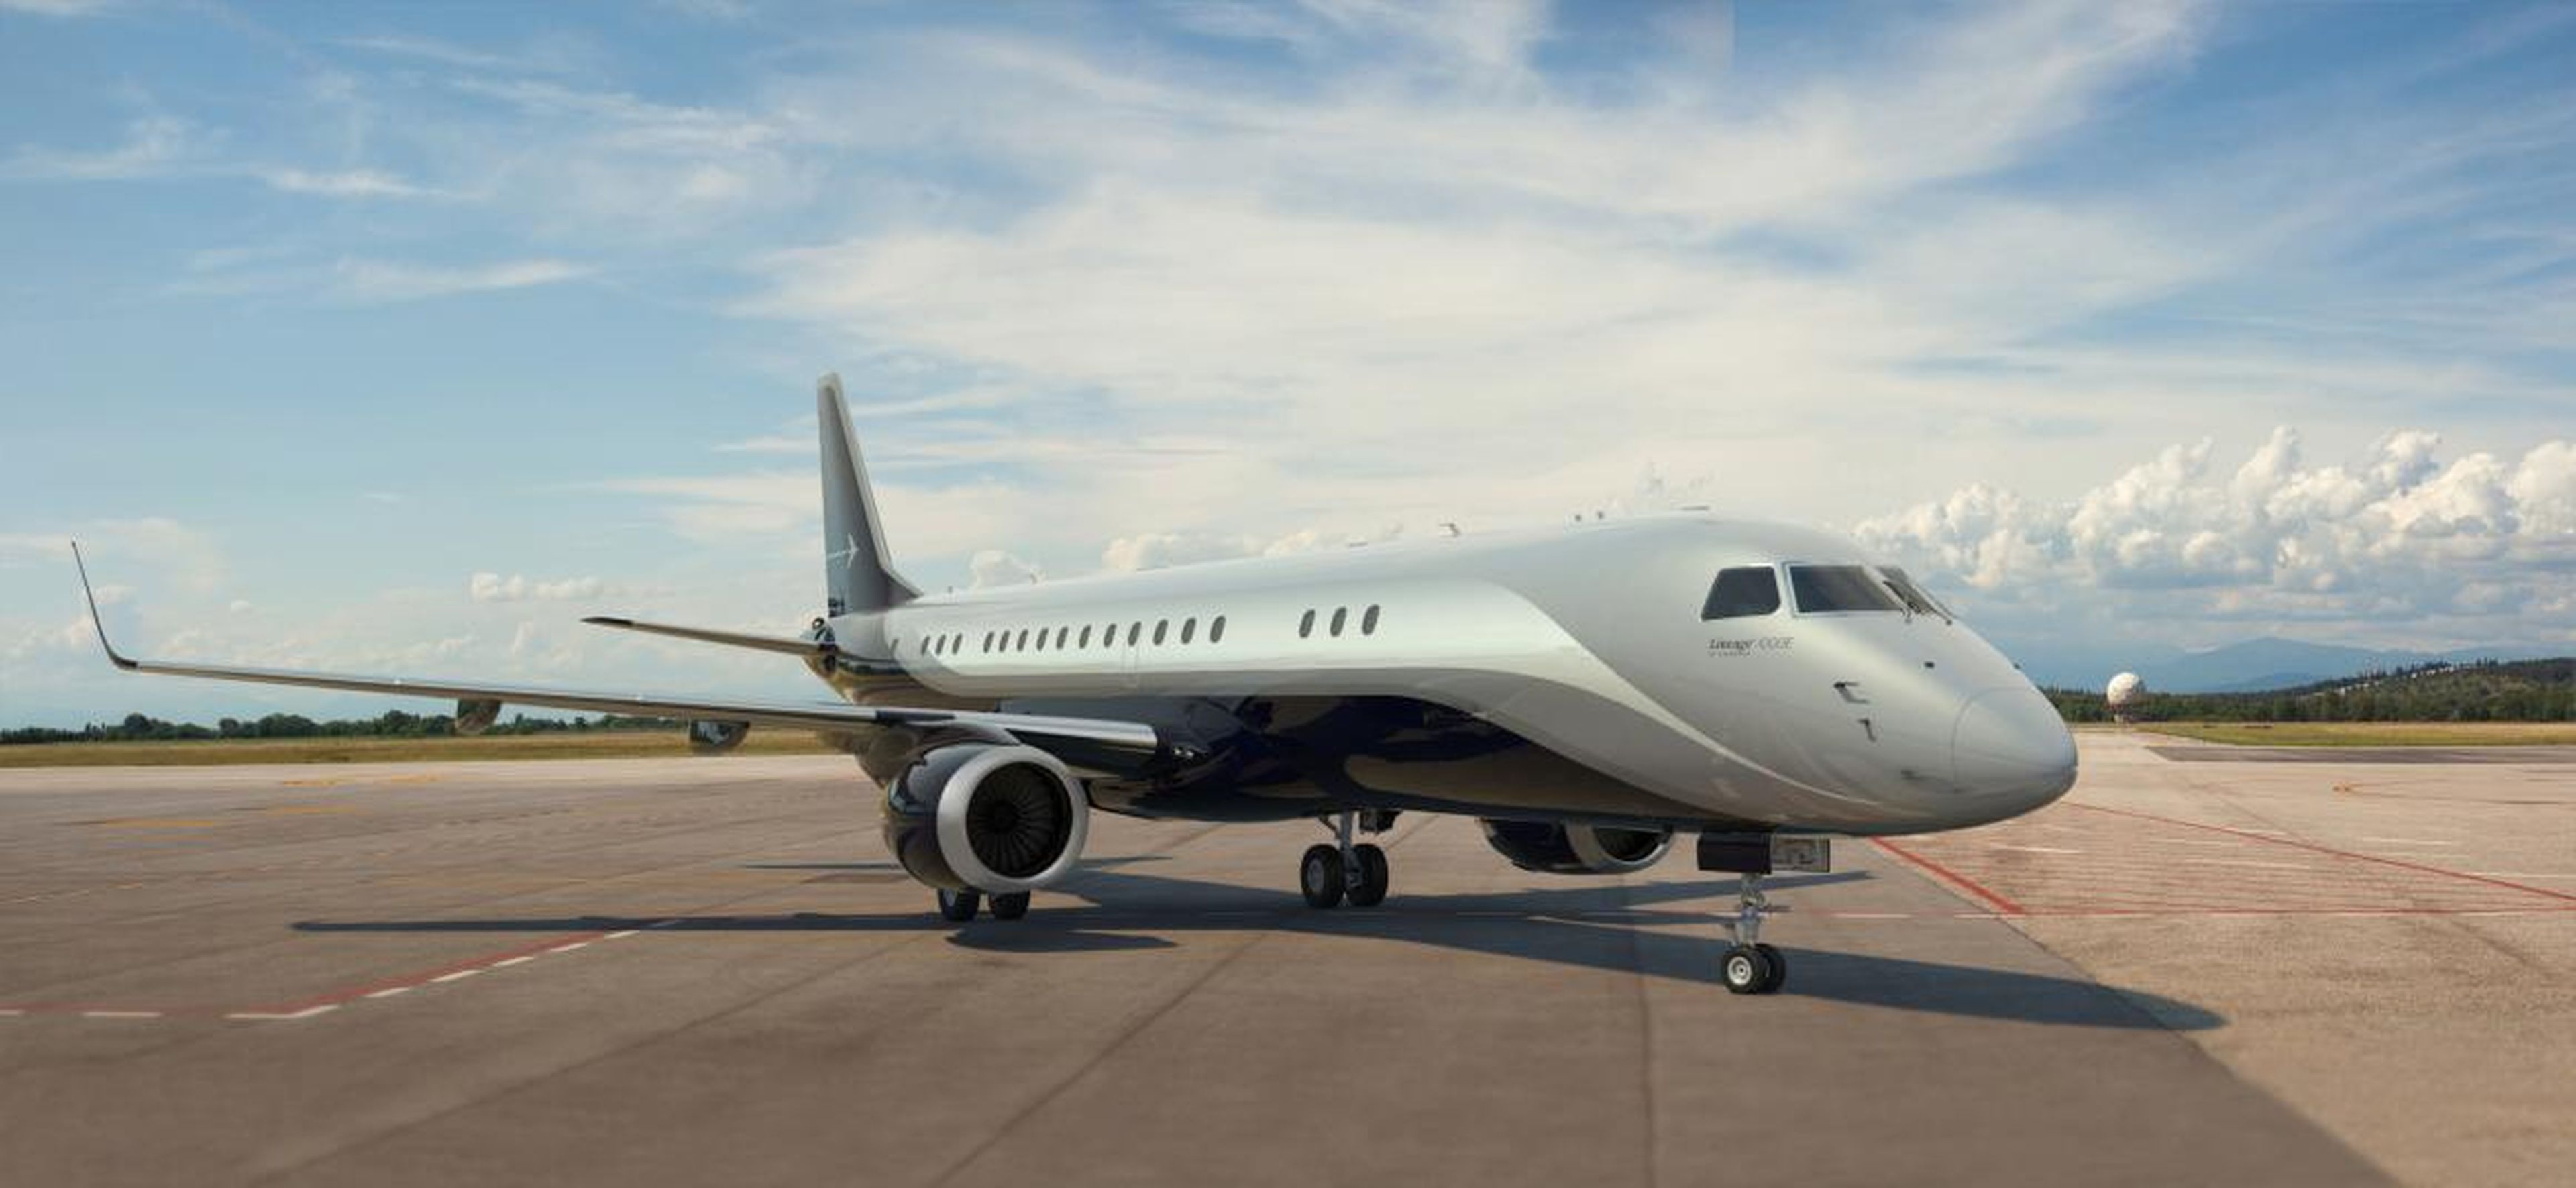 5. Embraer Lineage 1000E: This is the first of the converted airliners on the list. It's based on the popular Embraer E190 regional airliner.